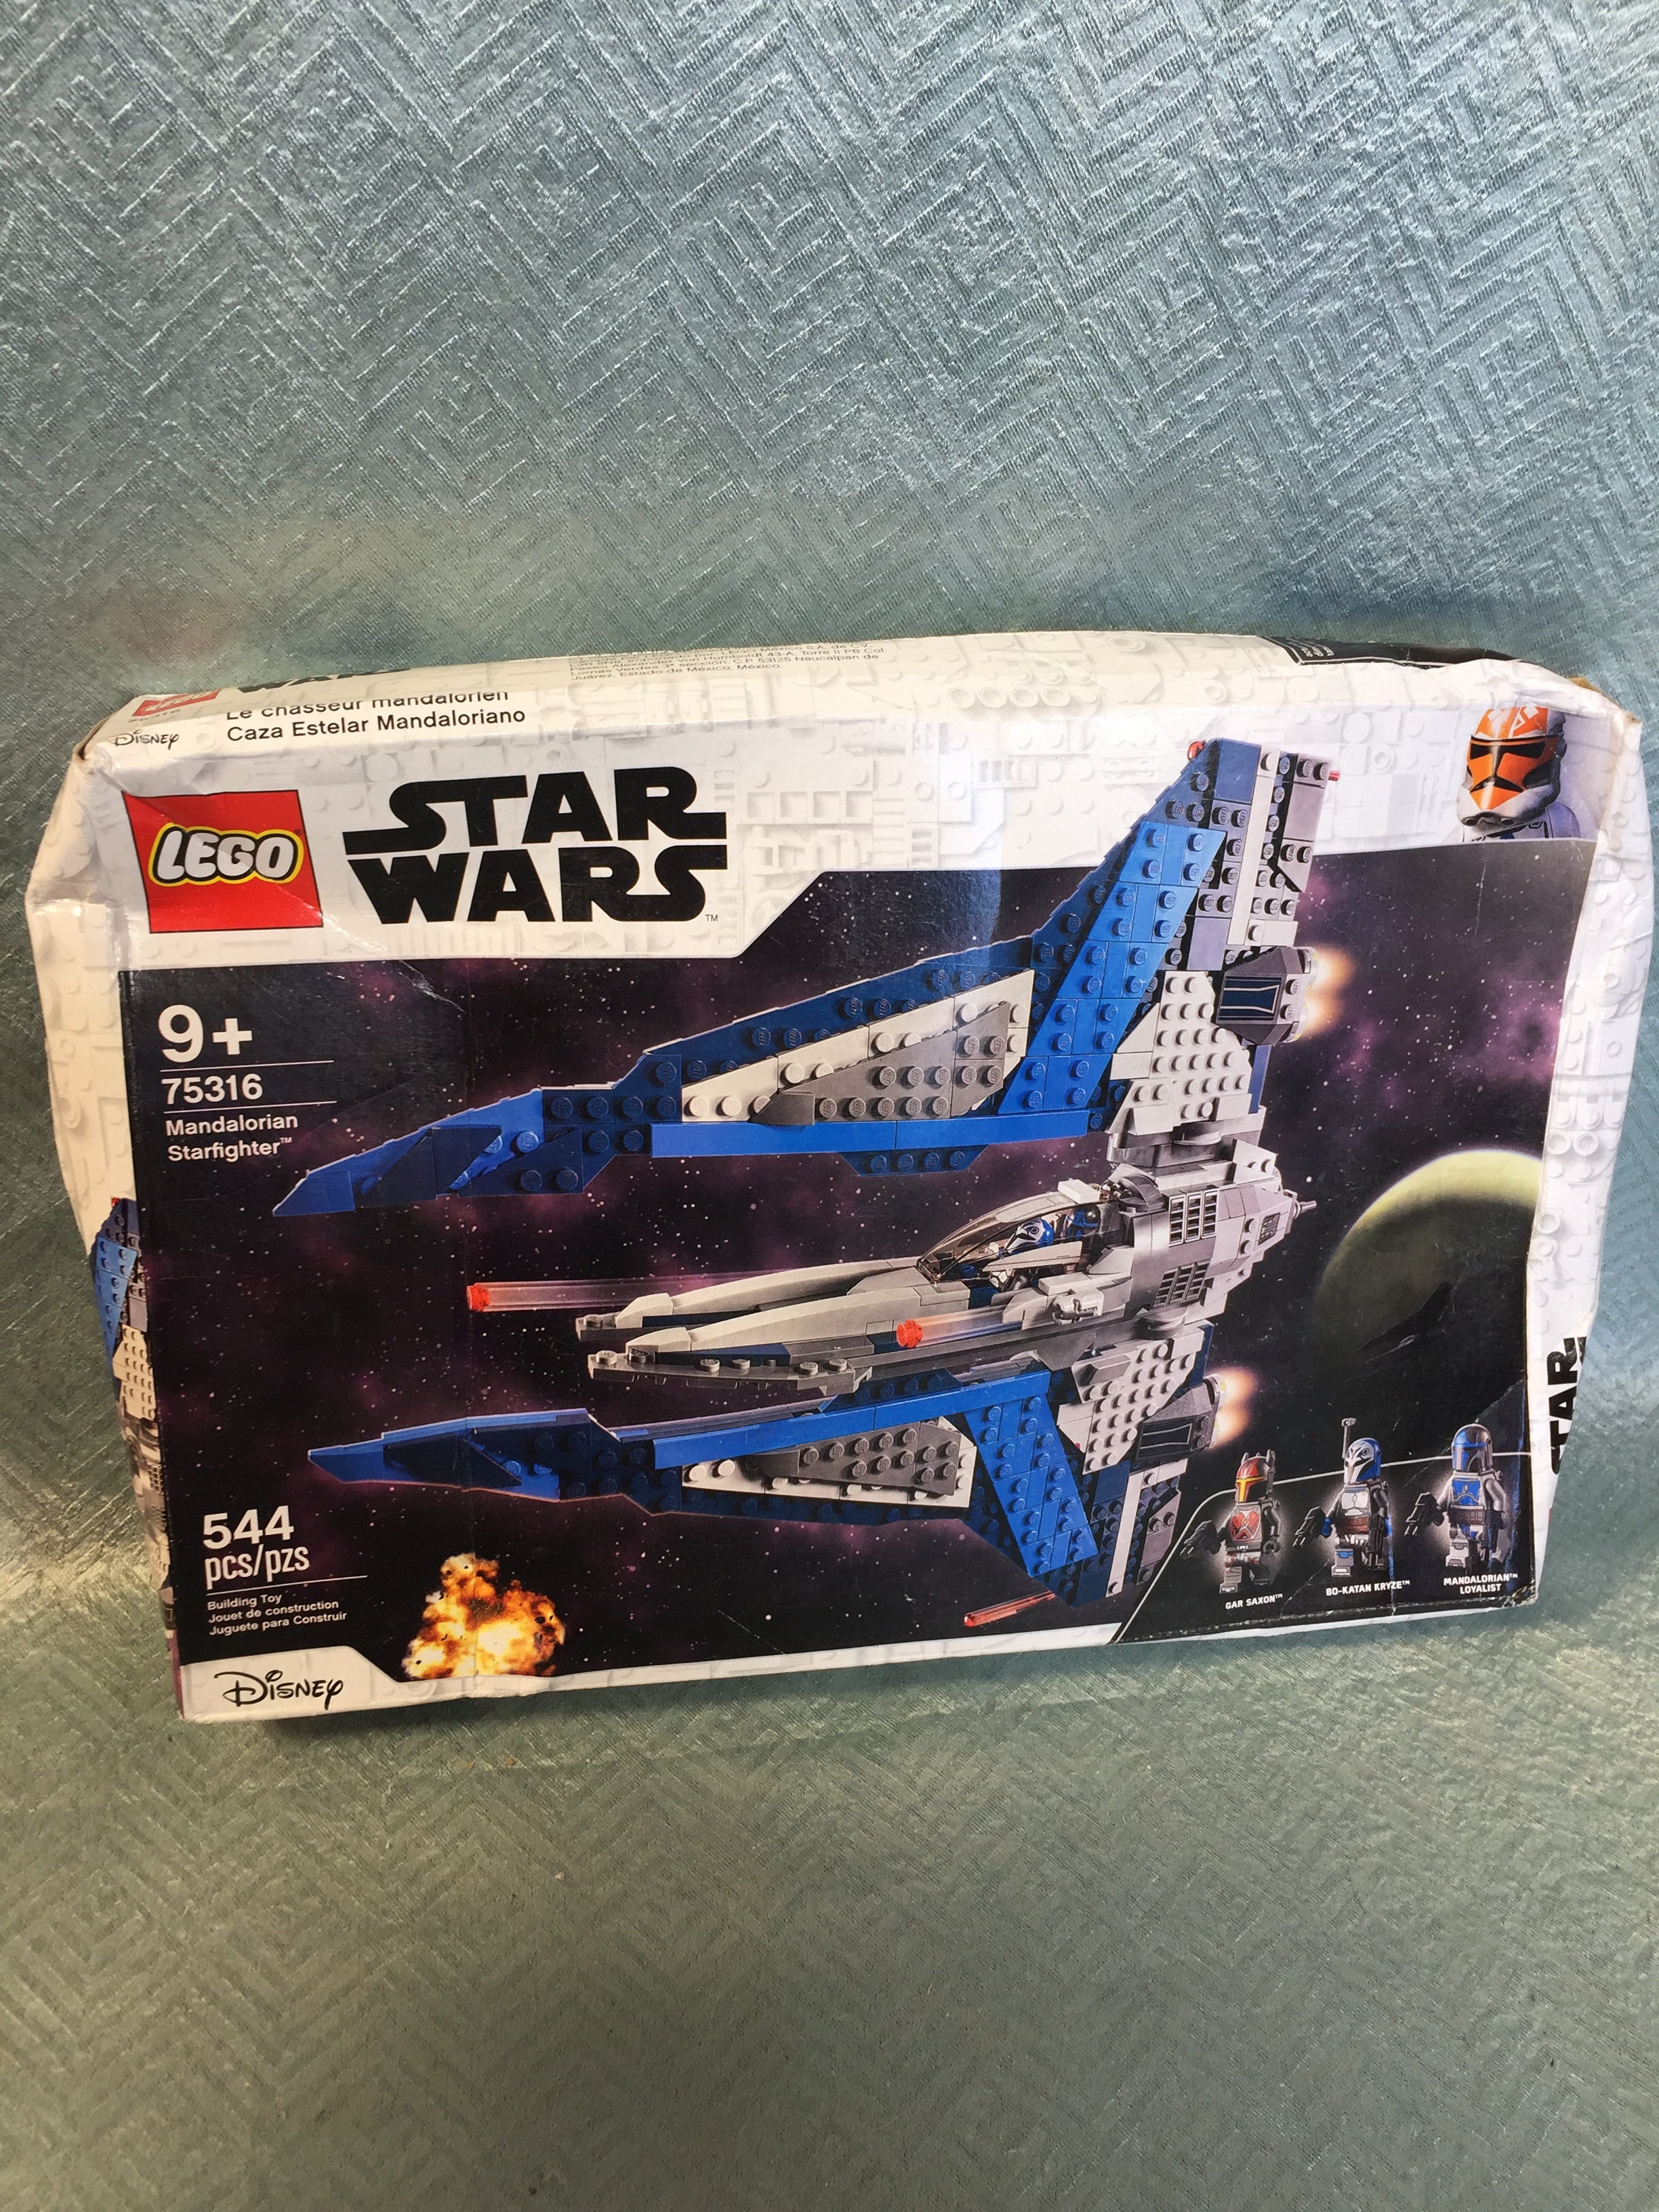 LEGO Star Wars Mandalorian Starfighter 75316 Awesome Toy Building Kit for Kids Featuring 3 Minifigures; New 2021 (544 Pieces) (7602378277102)